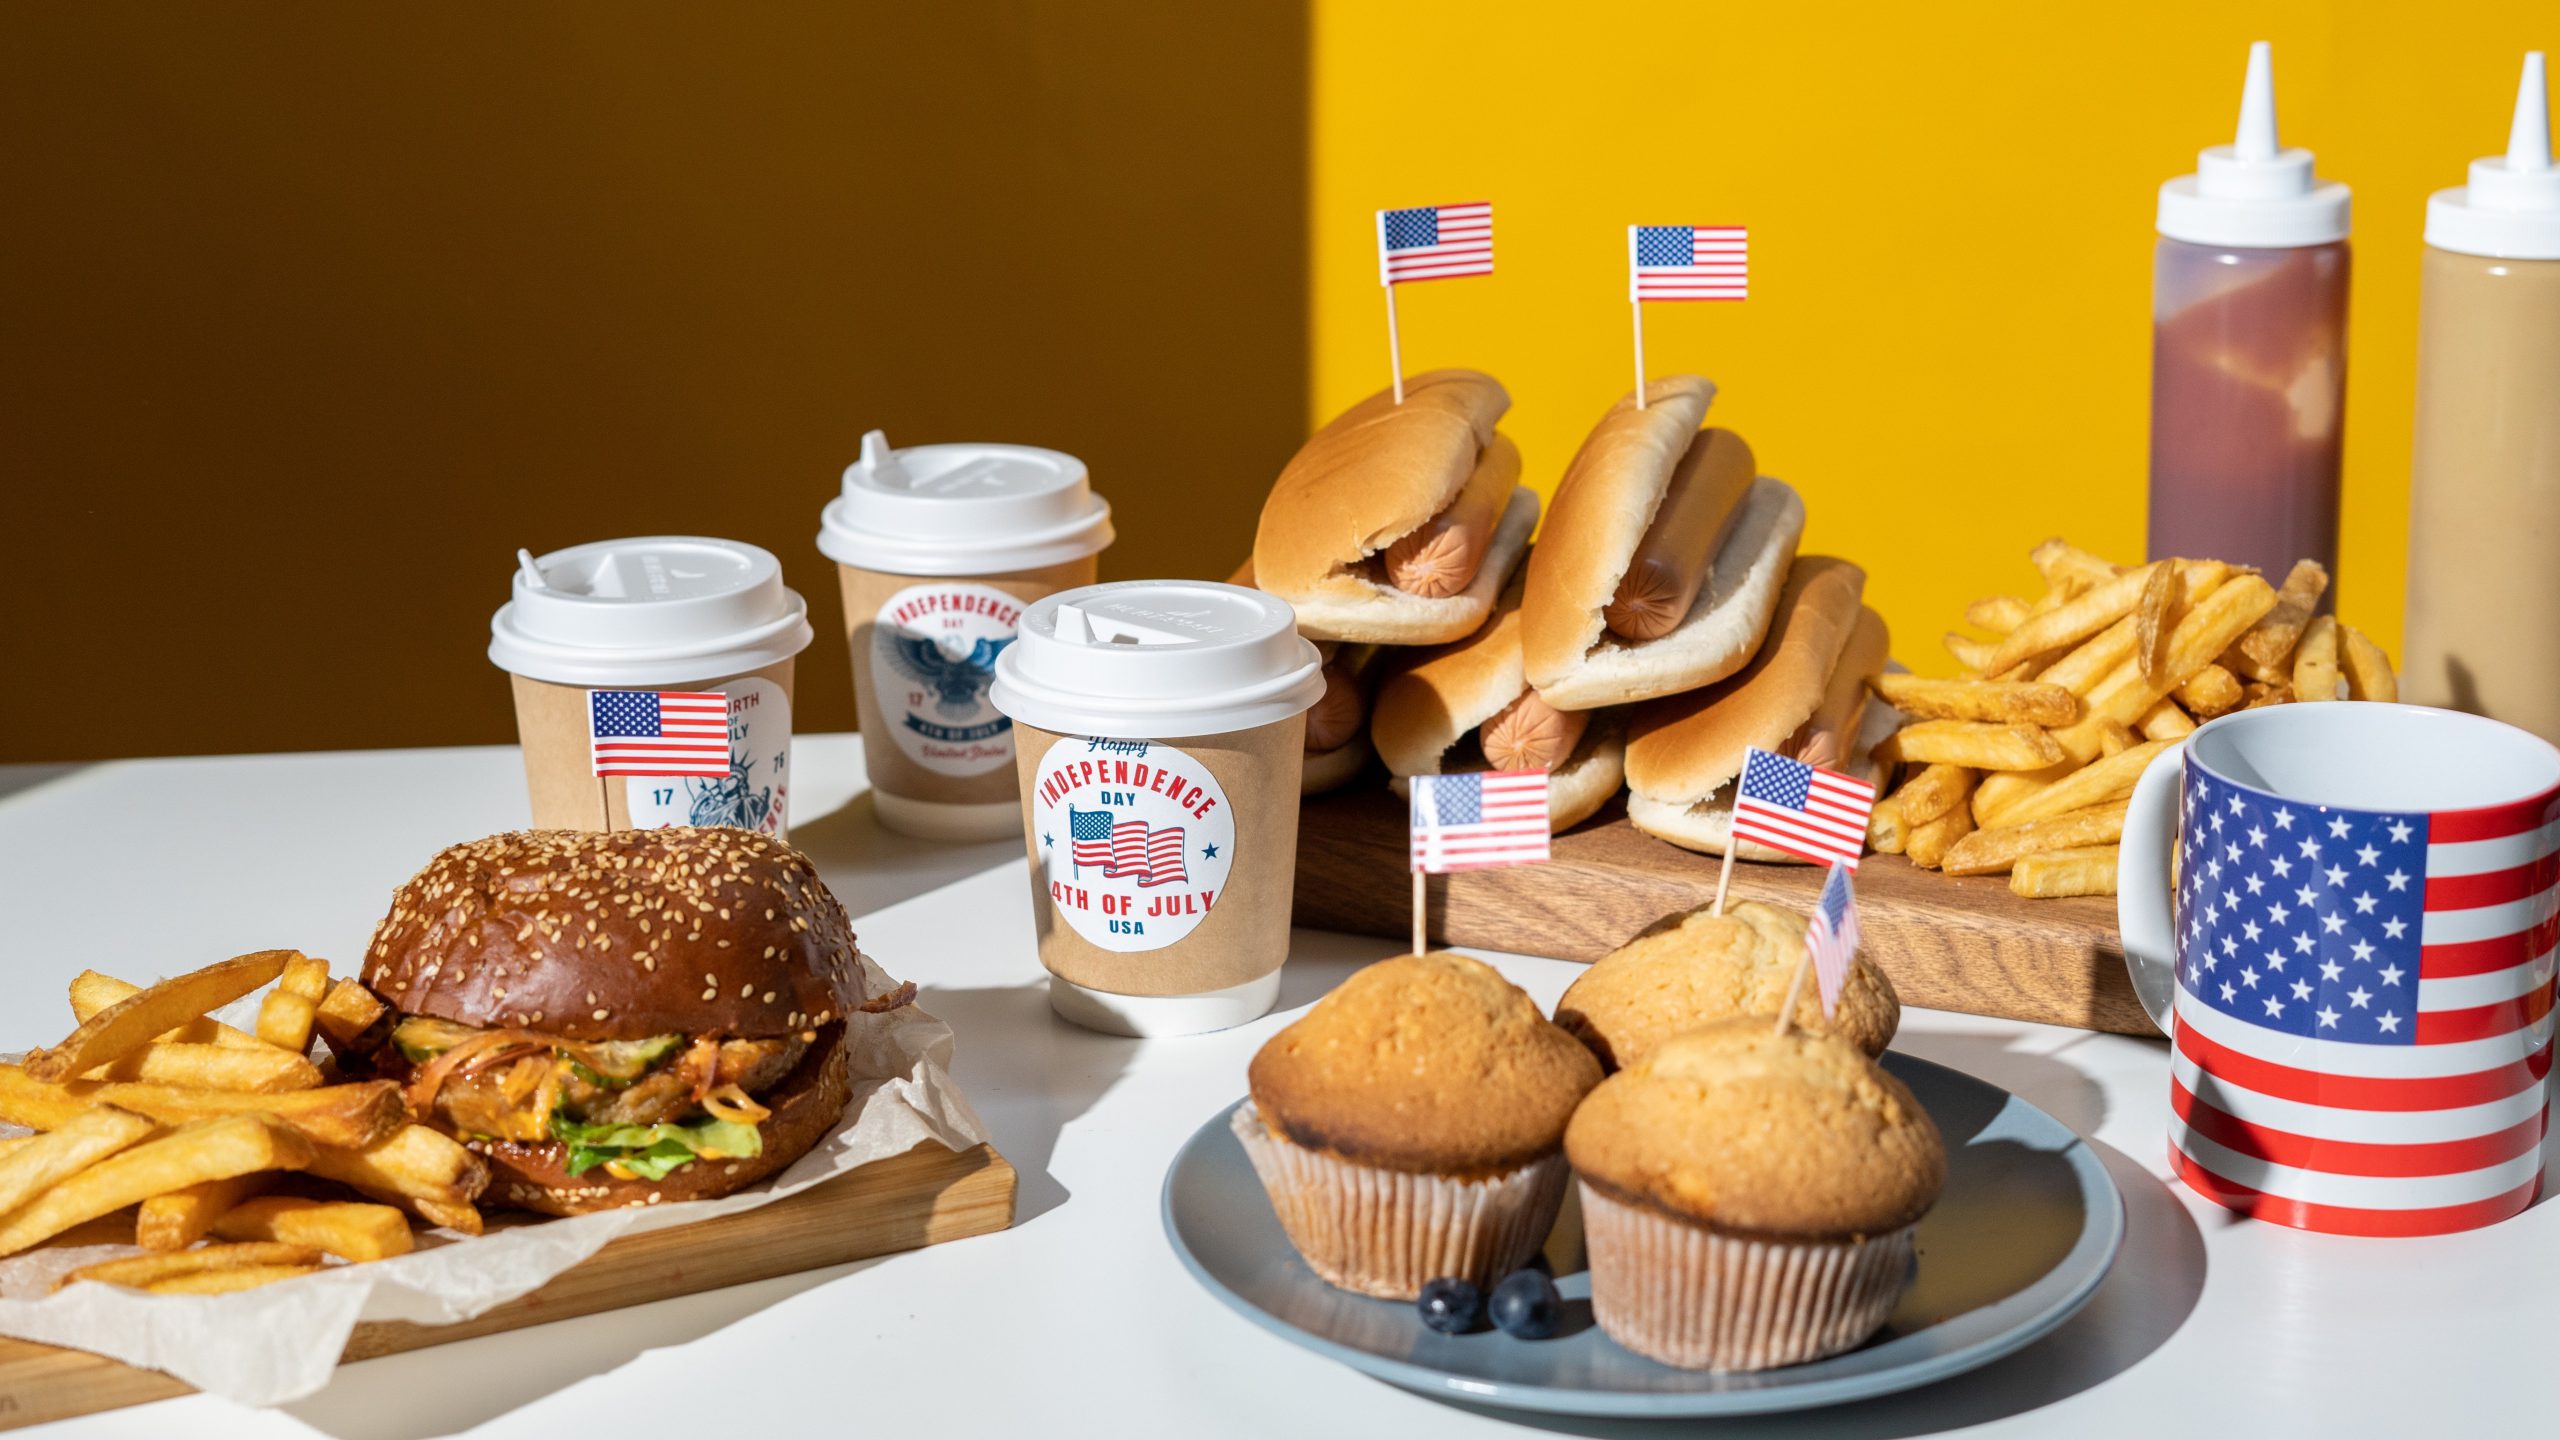 According to a survey from the American Farm Bureau Federation, the cost of an average 4th of July feast is up by 17 percent from 2021. Why is this?